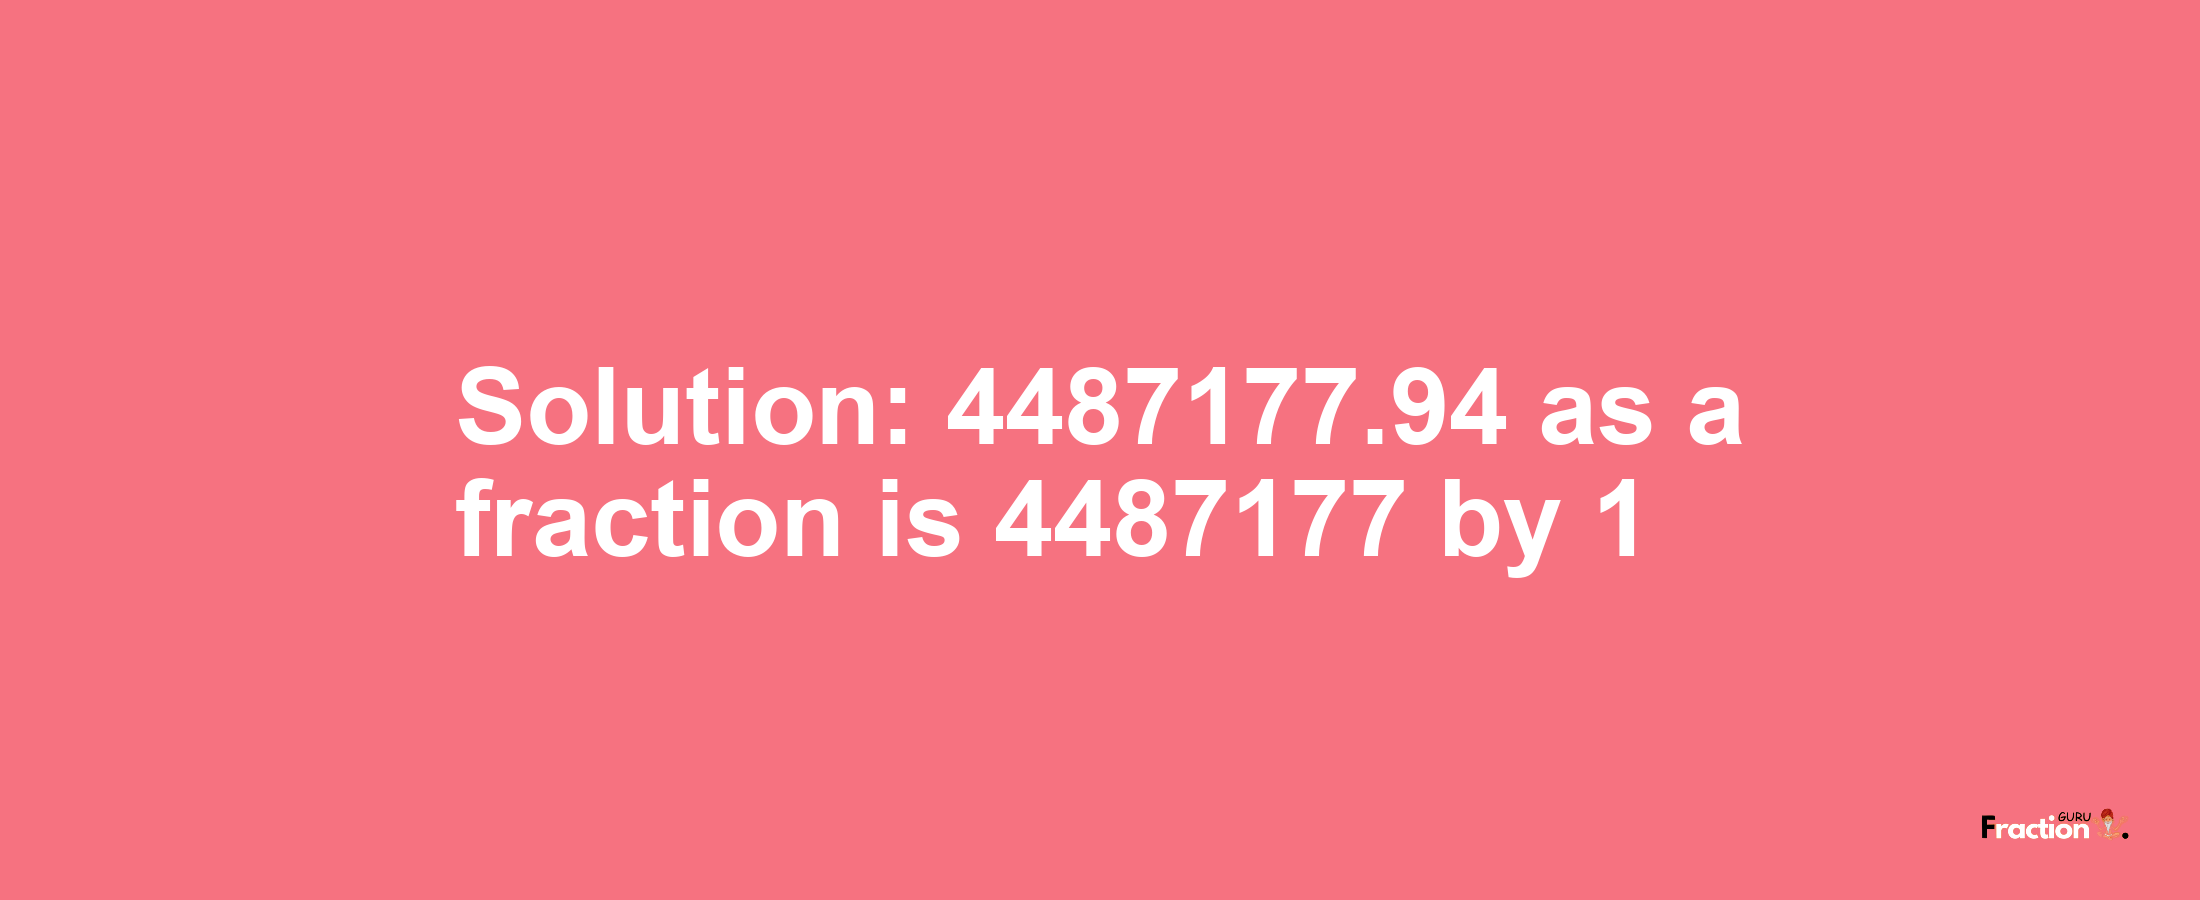 Solution:4487177.94 as a fraction is 4487177/1